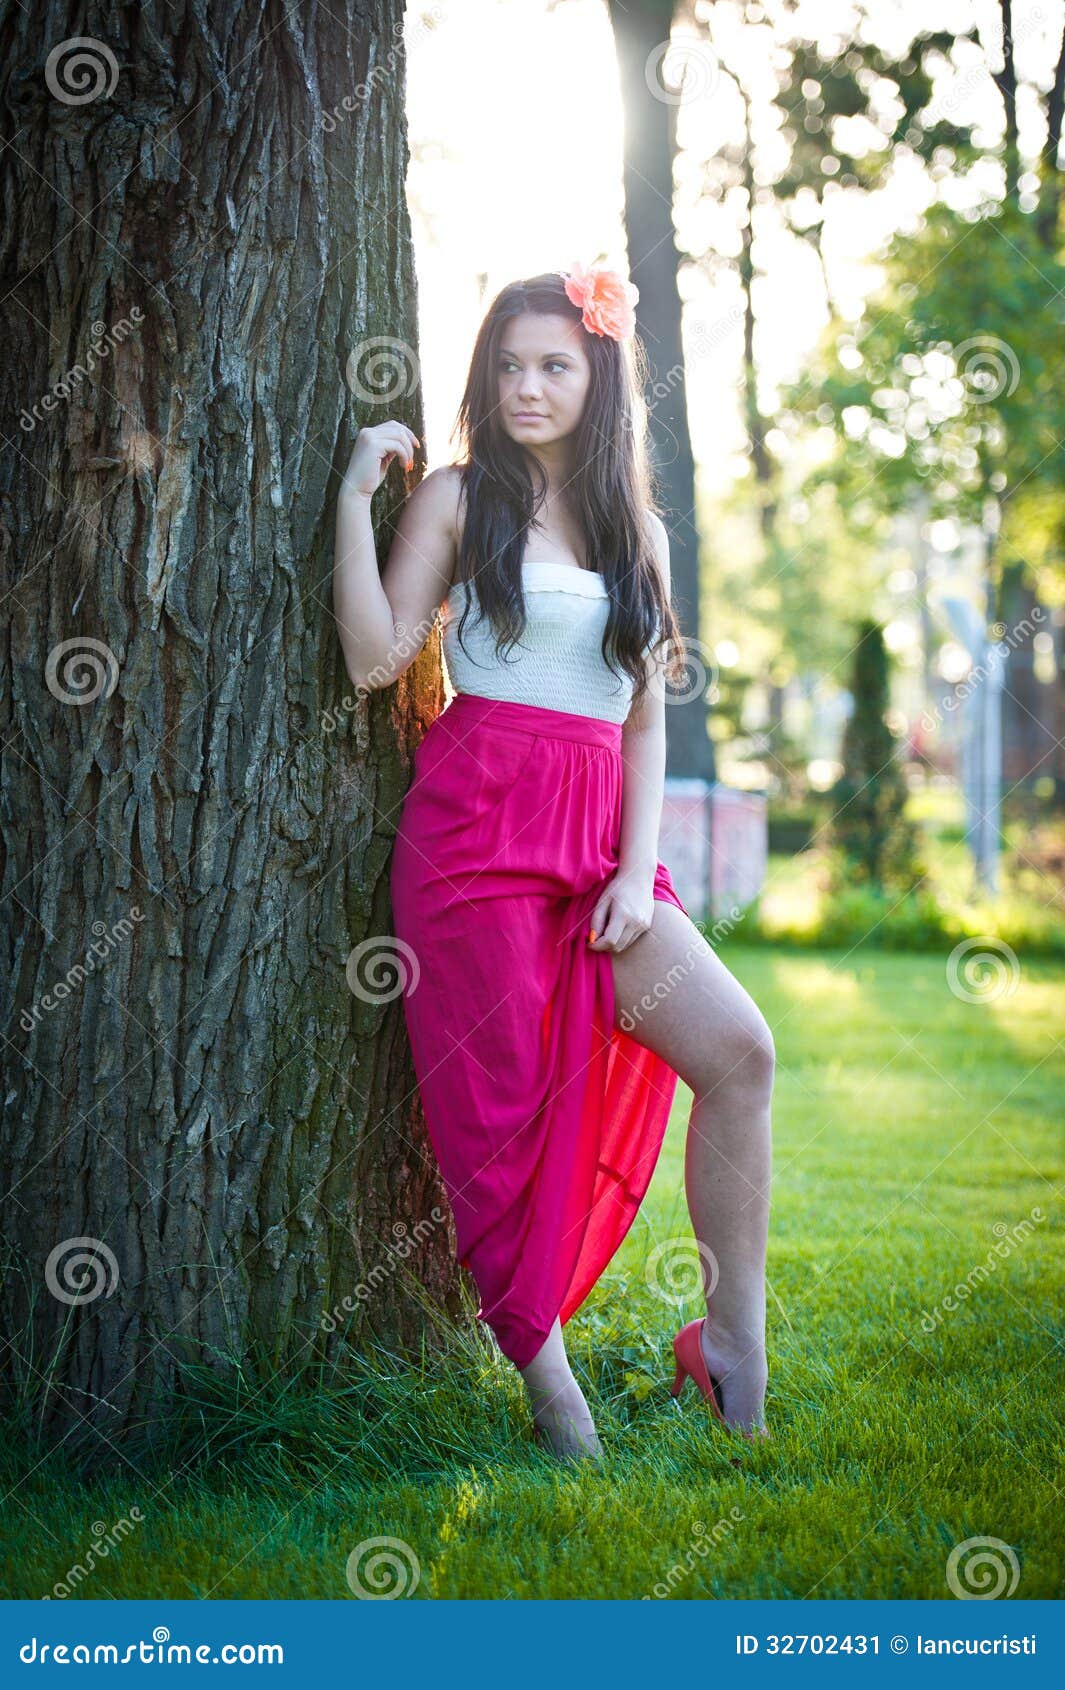 Full Length of Young Caucasian Female with Long Red Skirt Standing Near ...